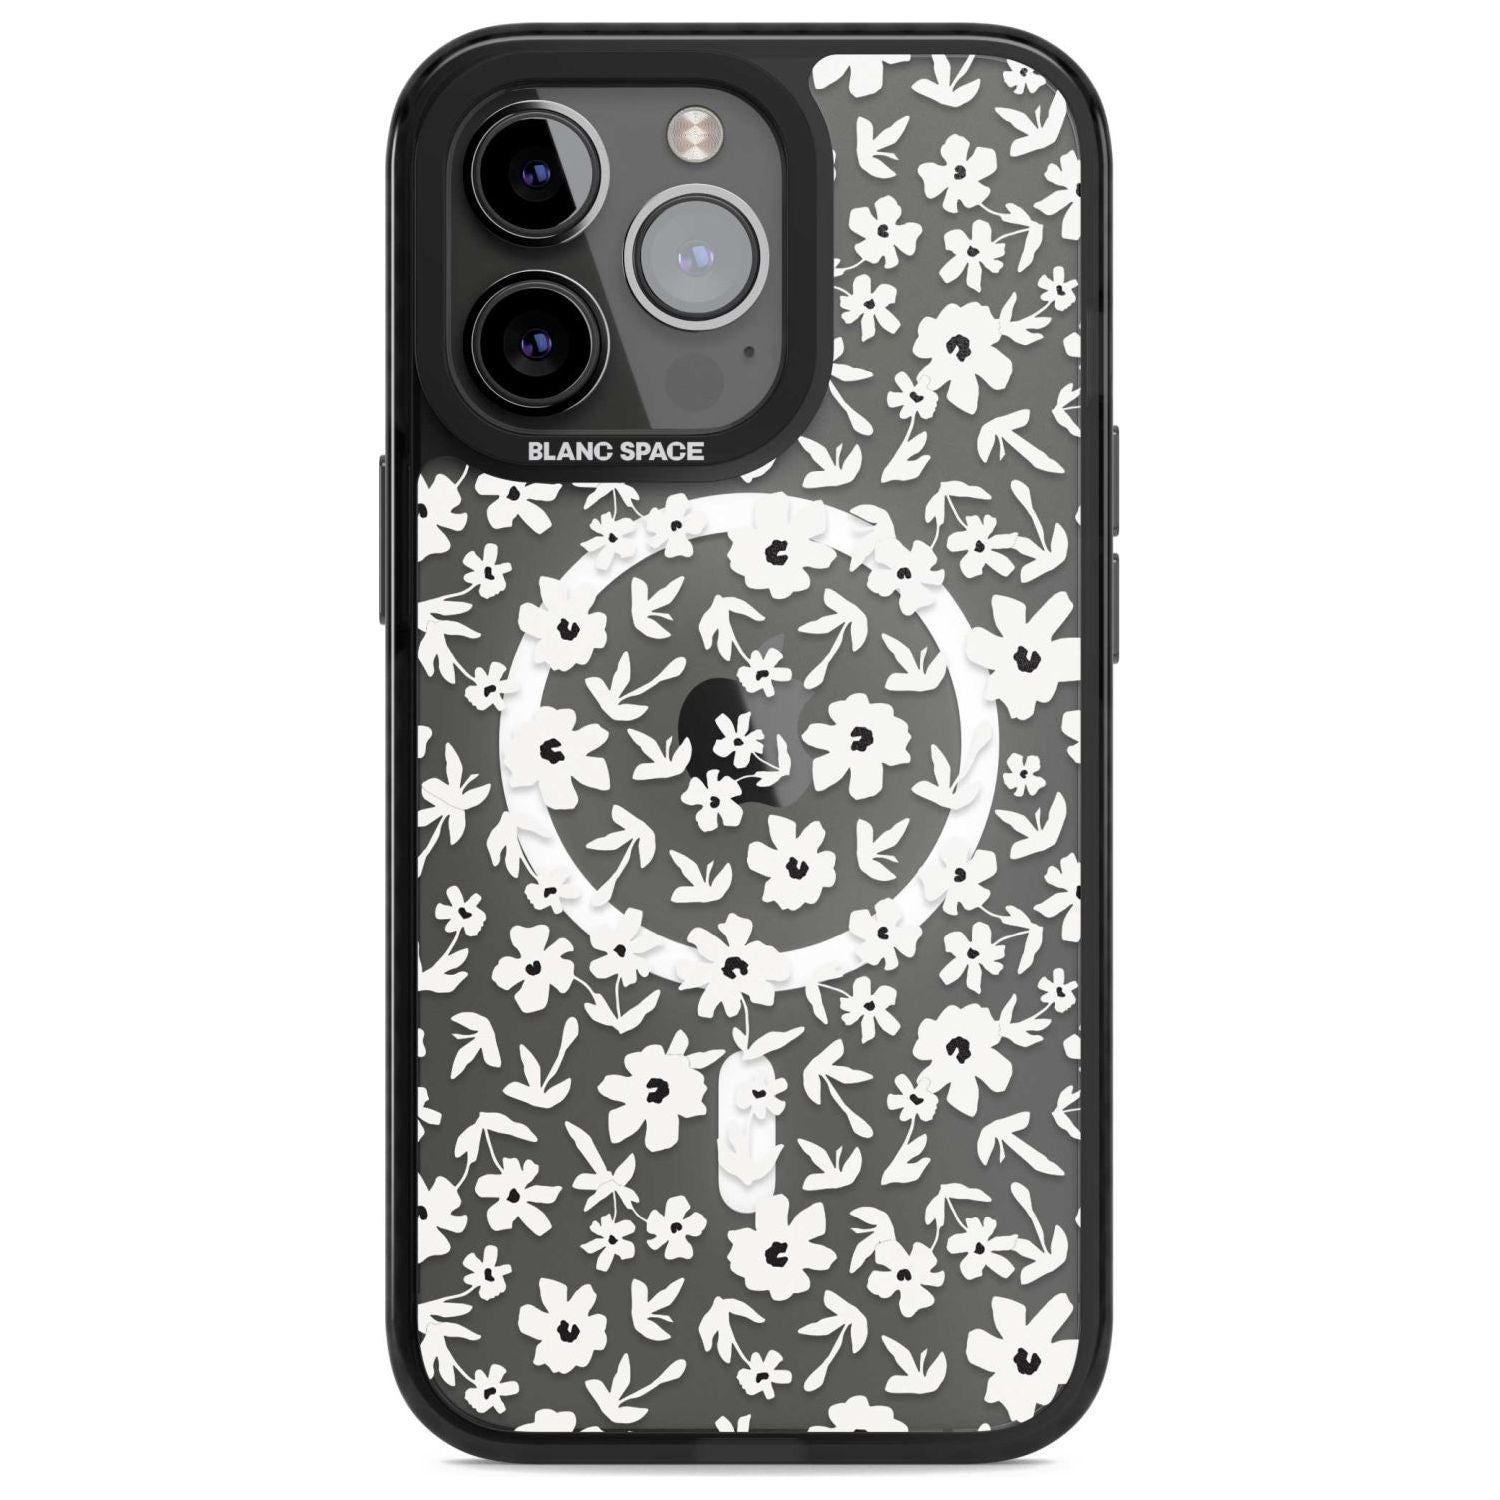 Floral Print on Transparent Phone Case iPhone 15 Pro Max / Magsafe Black Impact Case,iPhone 15 Pro / Magsafe Black Impact Case,iPhone 14 Pro Max / Magsafe Black Impact Case,iPhone 14 Pro / Magsafe Black Impact Case,iPhone 13 Pro / Magsafe Black Impact Case Blanc Space